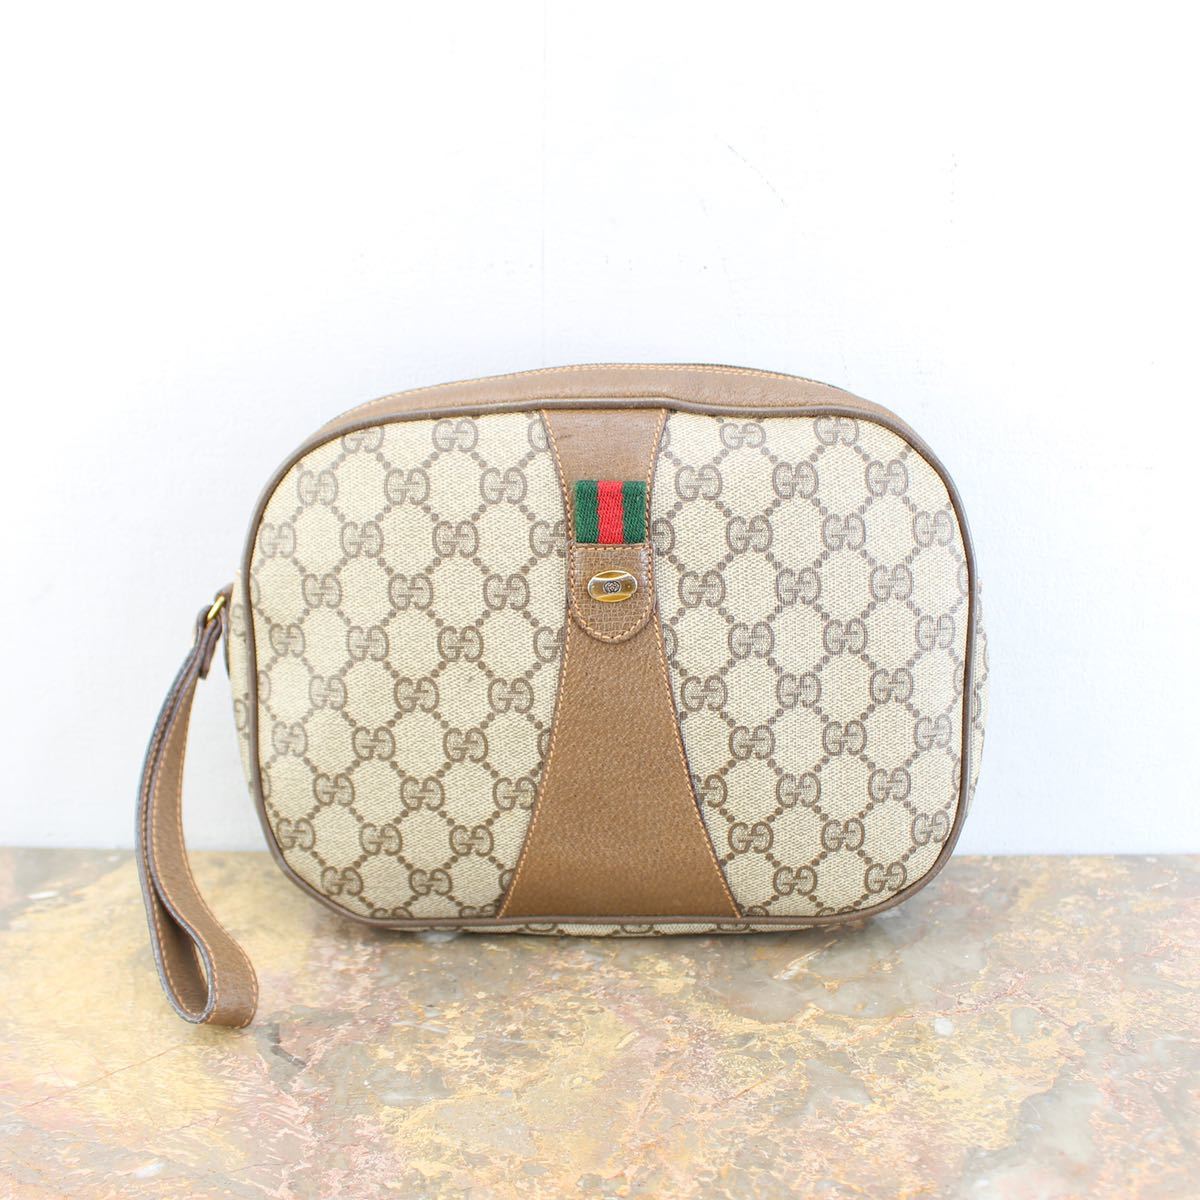 OLD GUCCI SHERRY LINE GG PATTERNED CLUTCH BAG MADE IN ITALY/オールドグッチシェリーラインGG柄クラッチバッグ_画像1